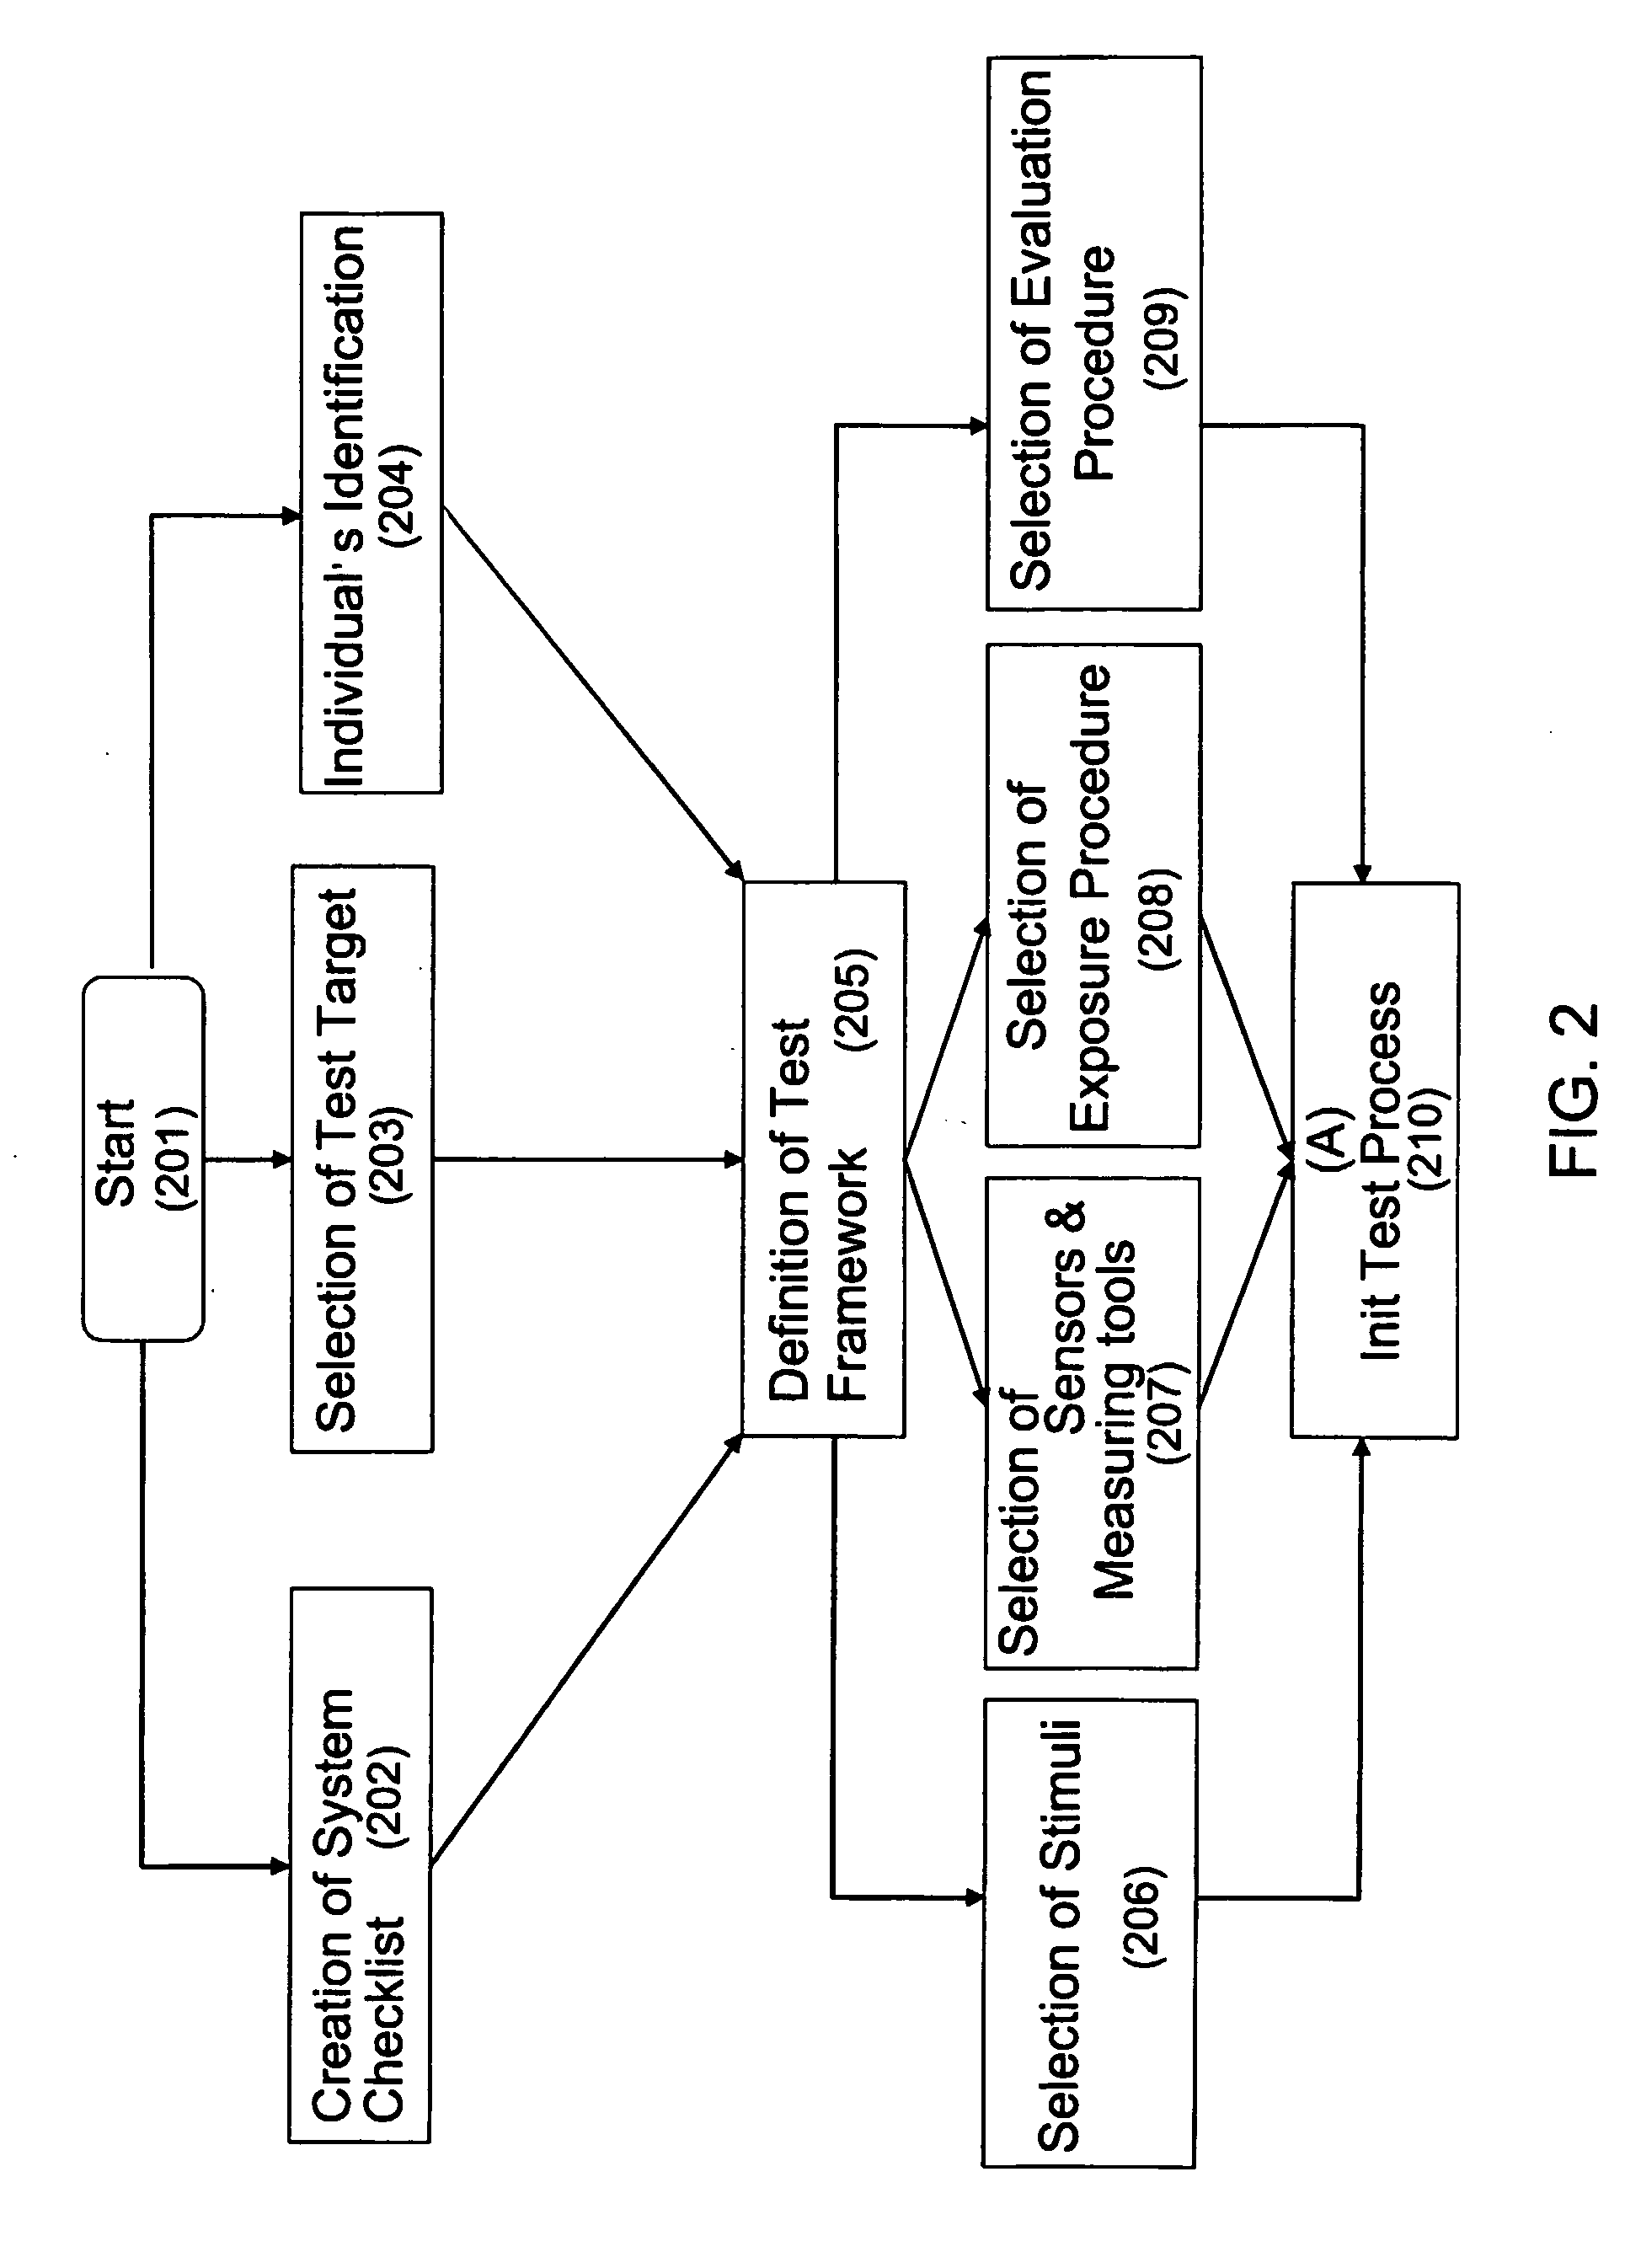 Method and system for screening and indicating individuals with hidden intent